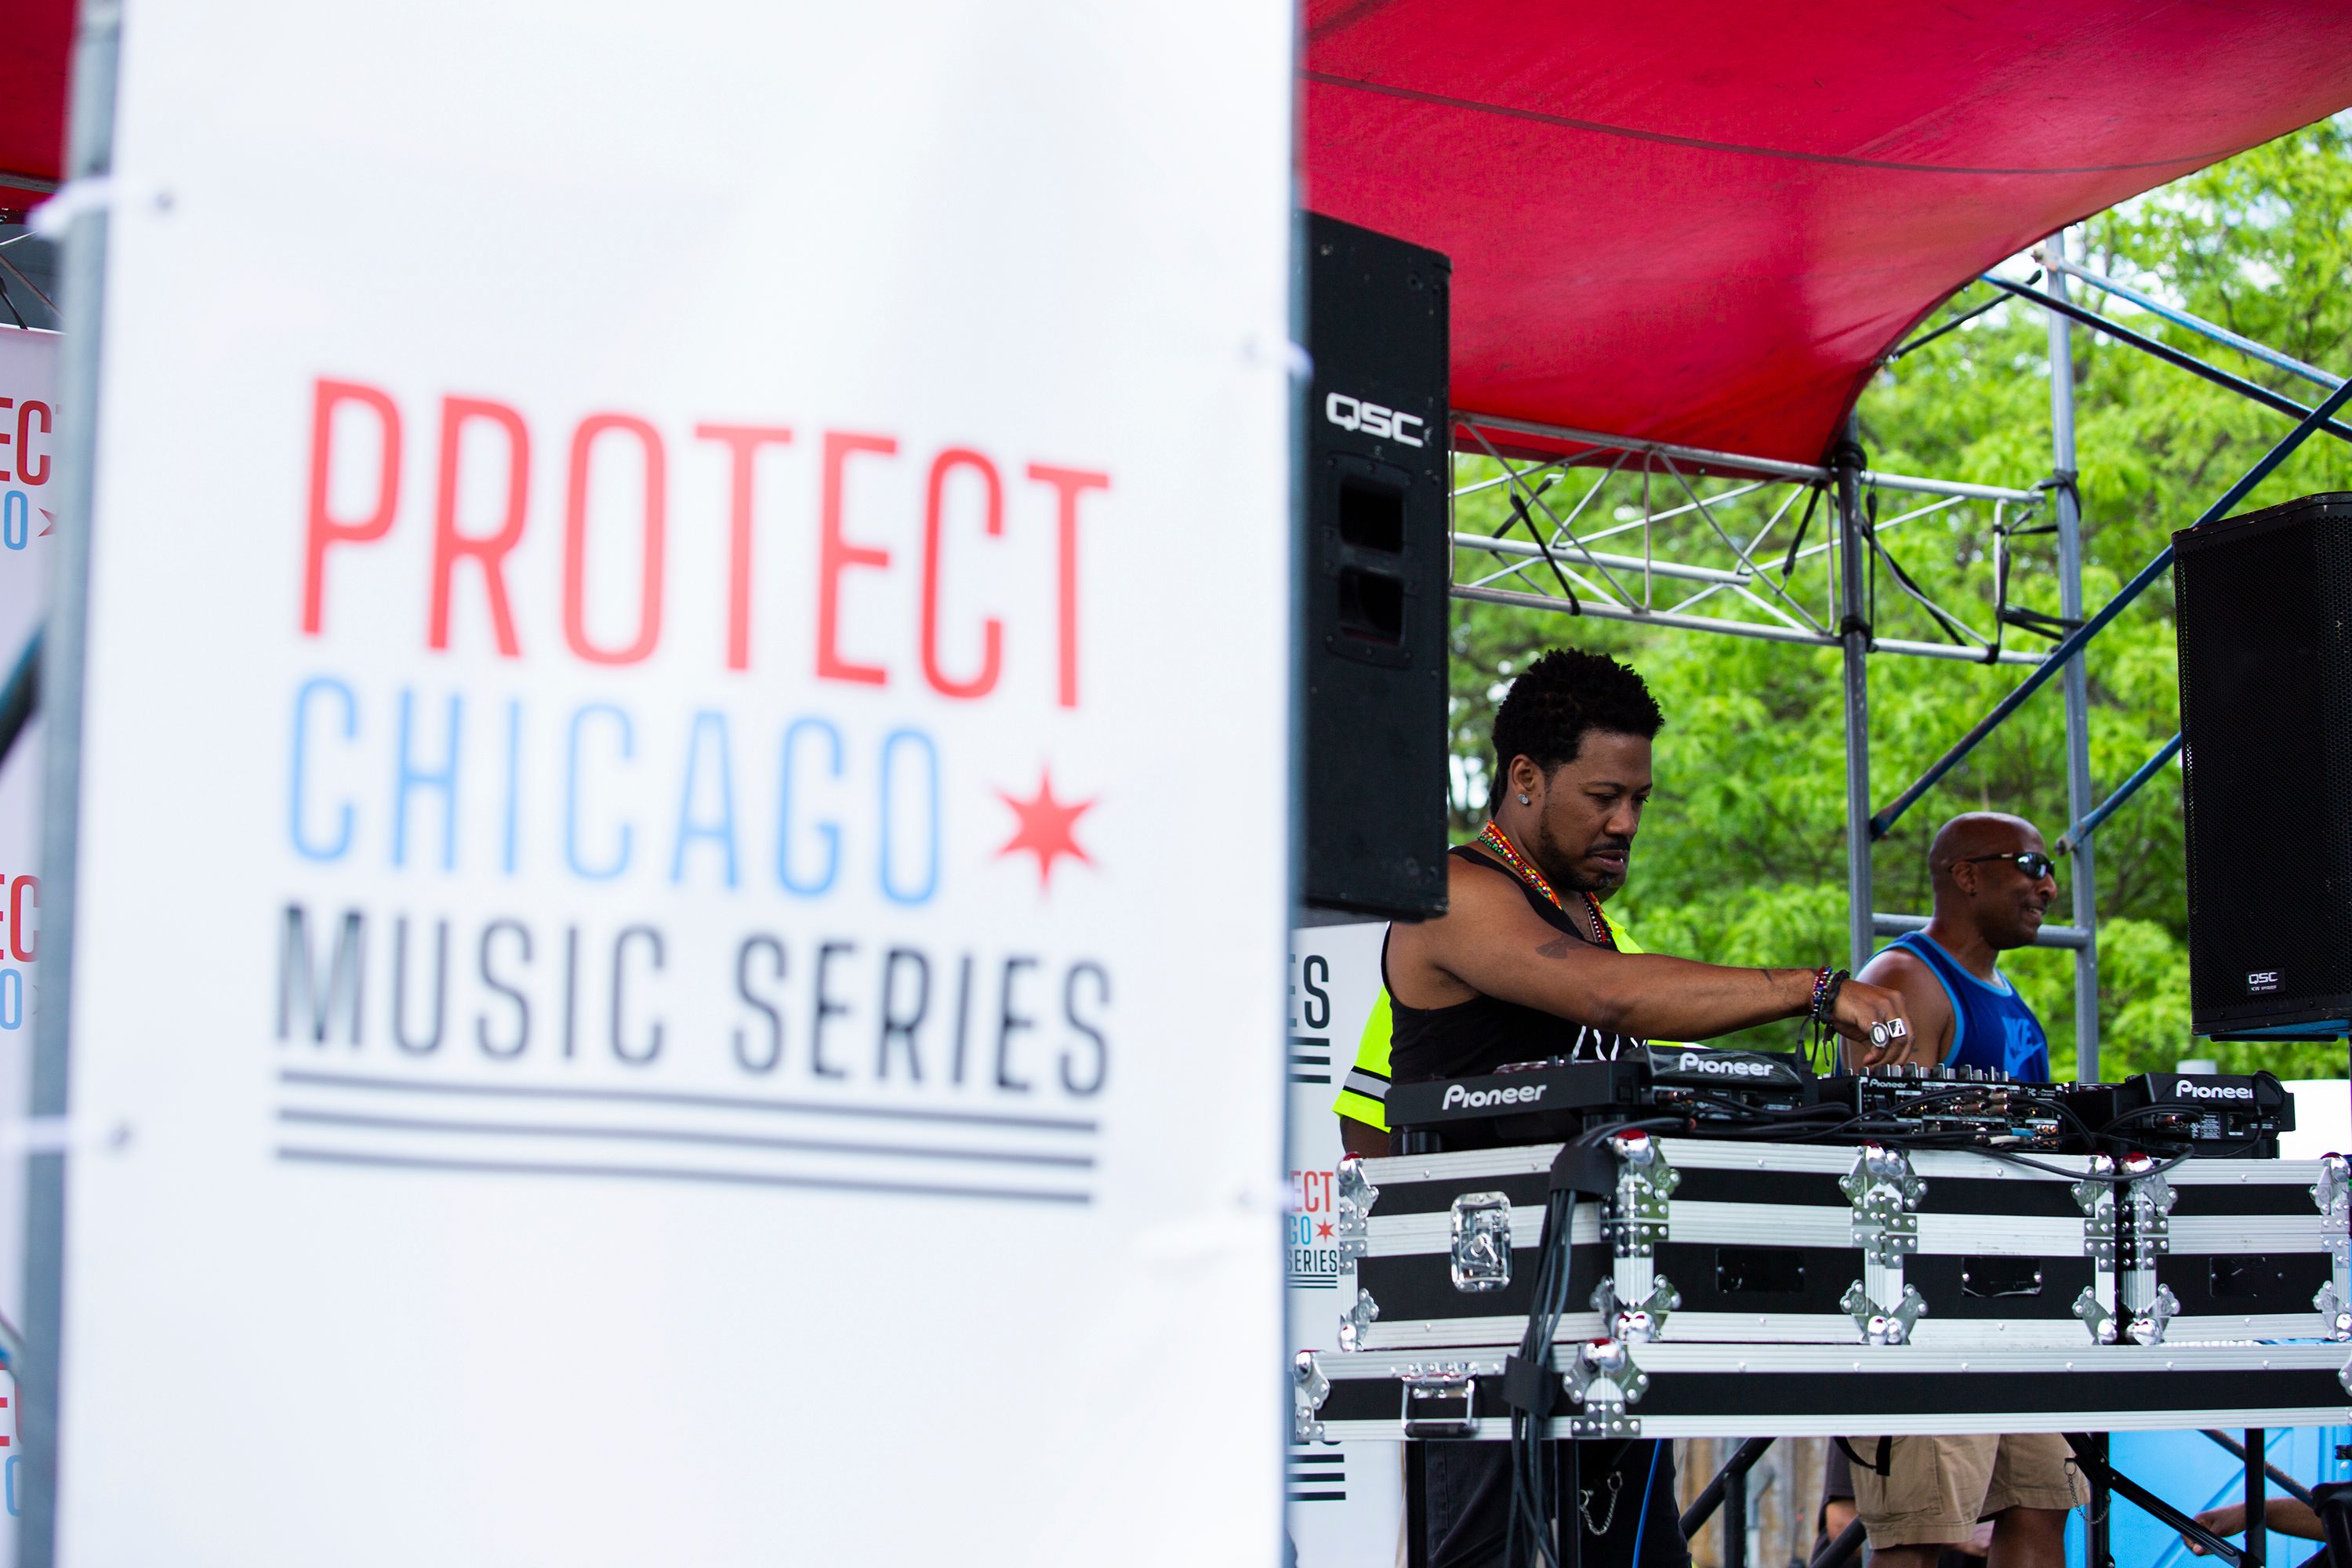 City of Chicago Hosts First Concert of the Protect Chicago Music Series for Fully Vaccinated Chicagoans to Kickoff Summertime Music 